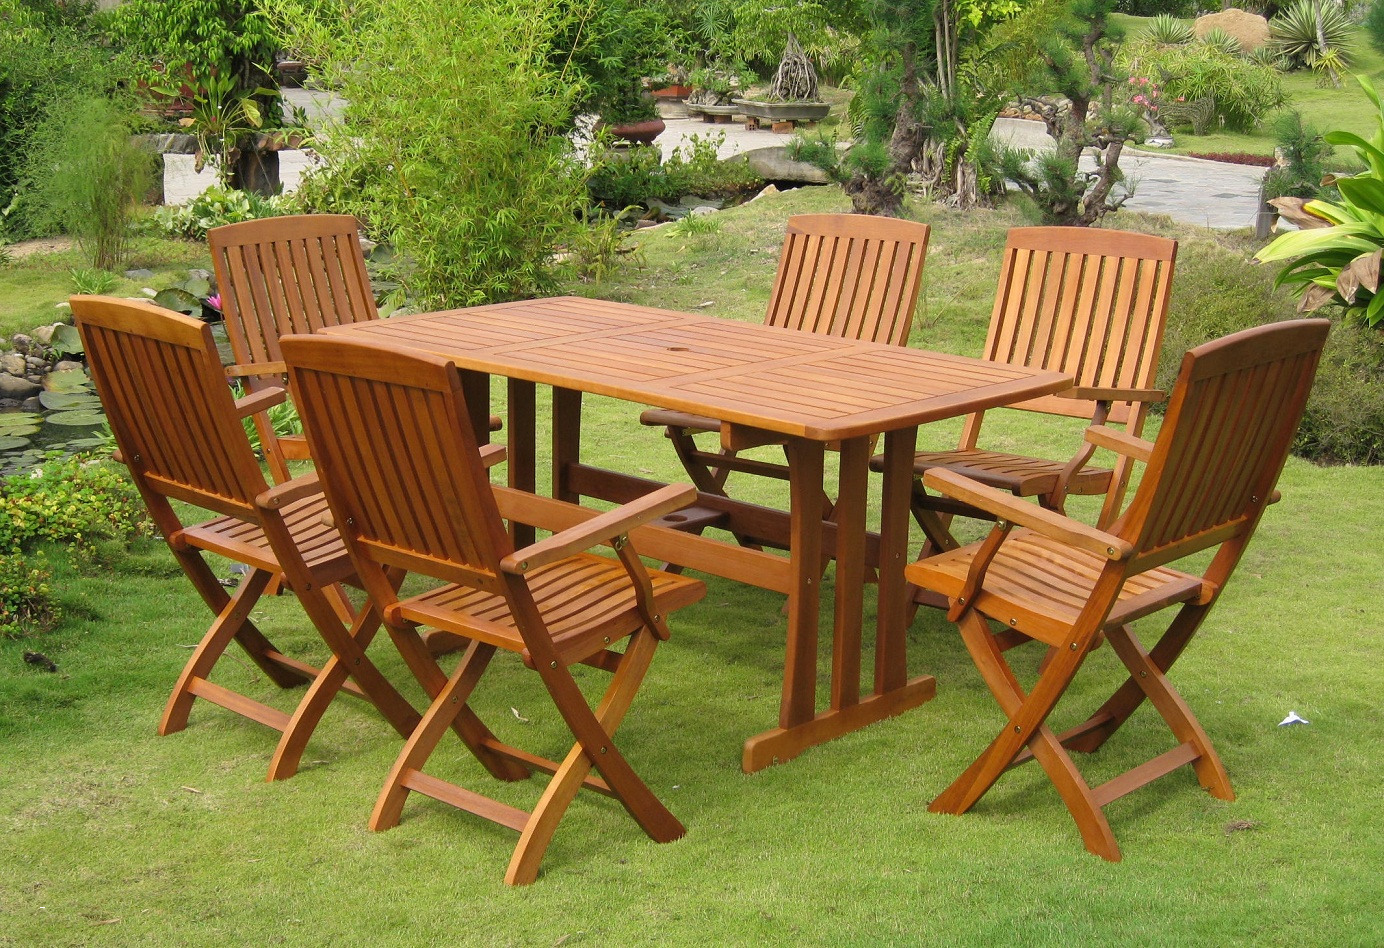 wooden patio furniture wood folding patio chairs best of wooden outdoor tables image teak sears ZHBHPYJ